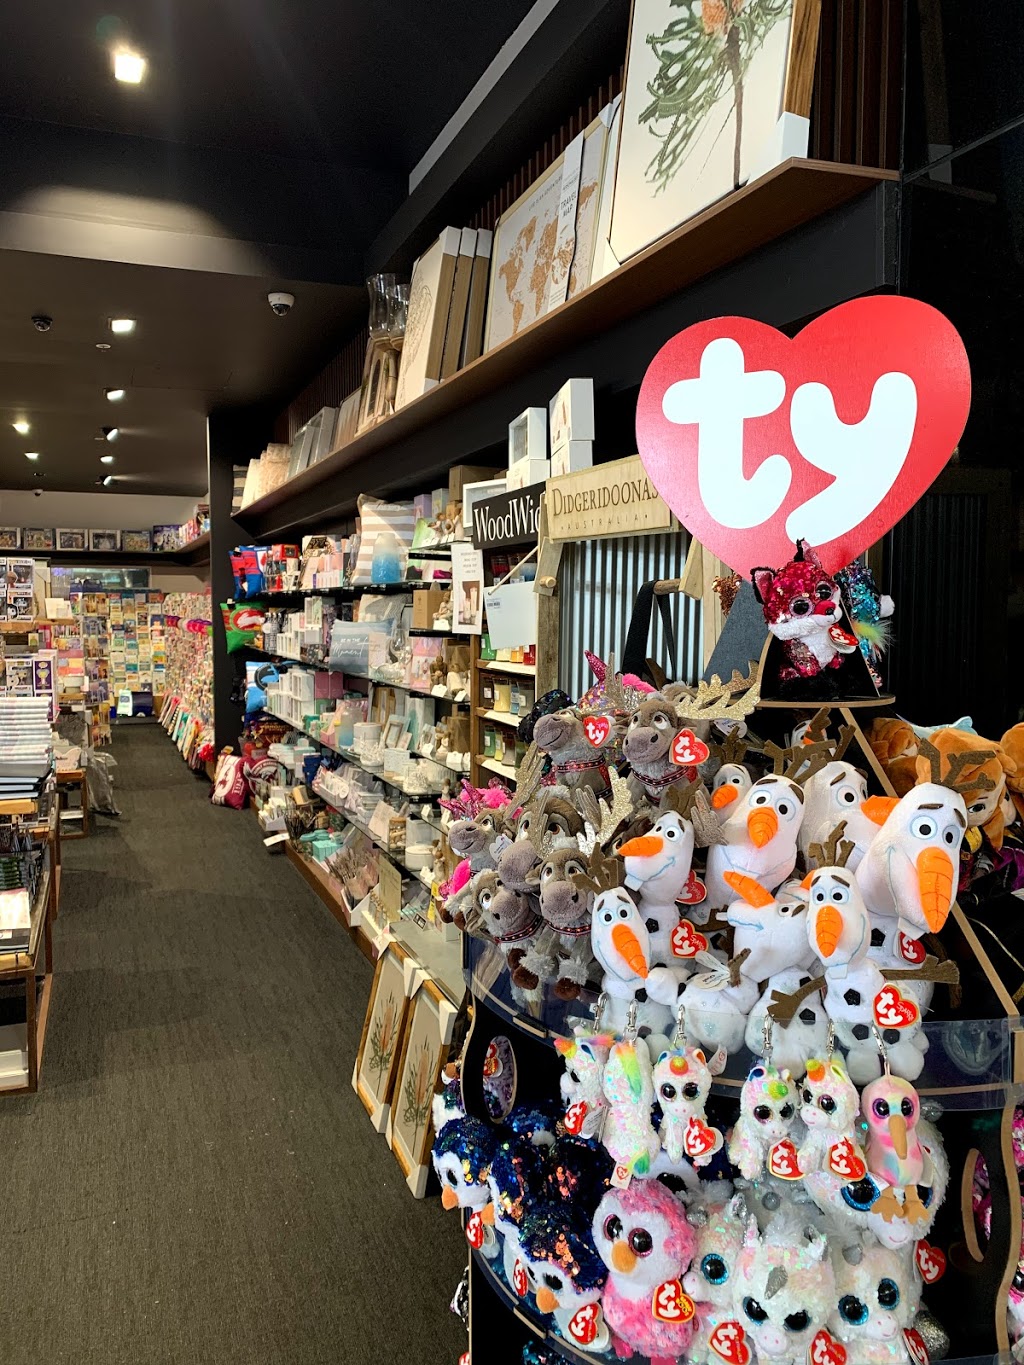 newsXpress Forster | book store | Shop 120/3-17 Breese Parade, Forster NSW 2428, Australia | 0265549633 OR +61 2 6554 9633